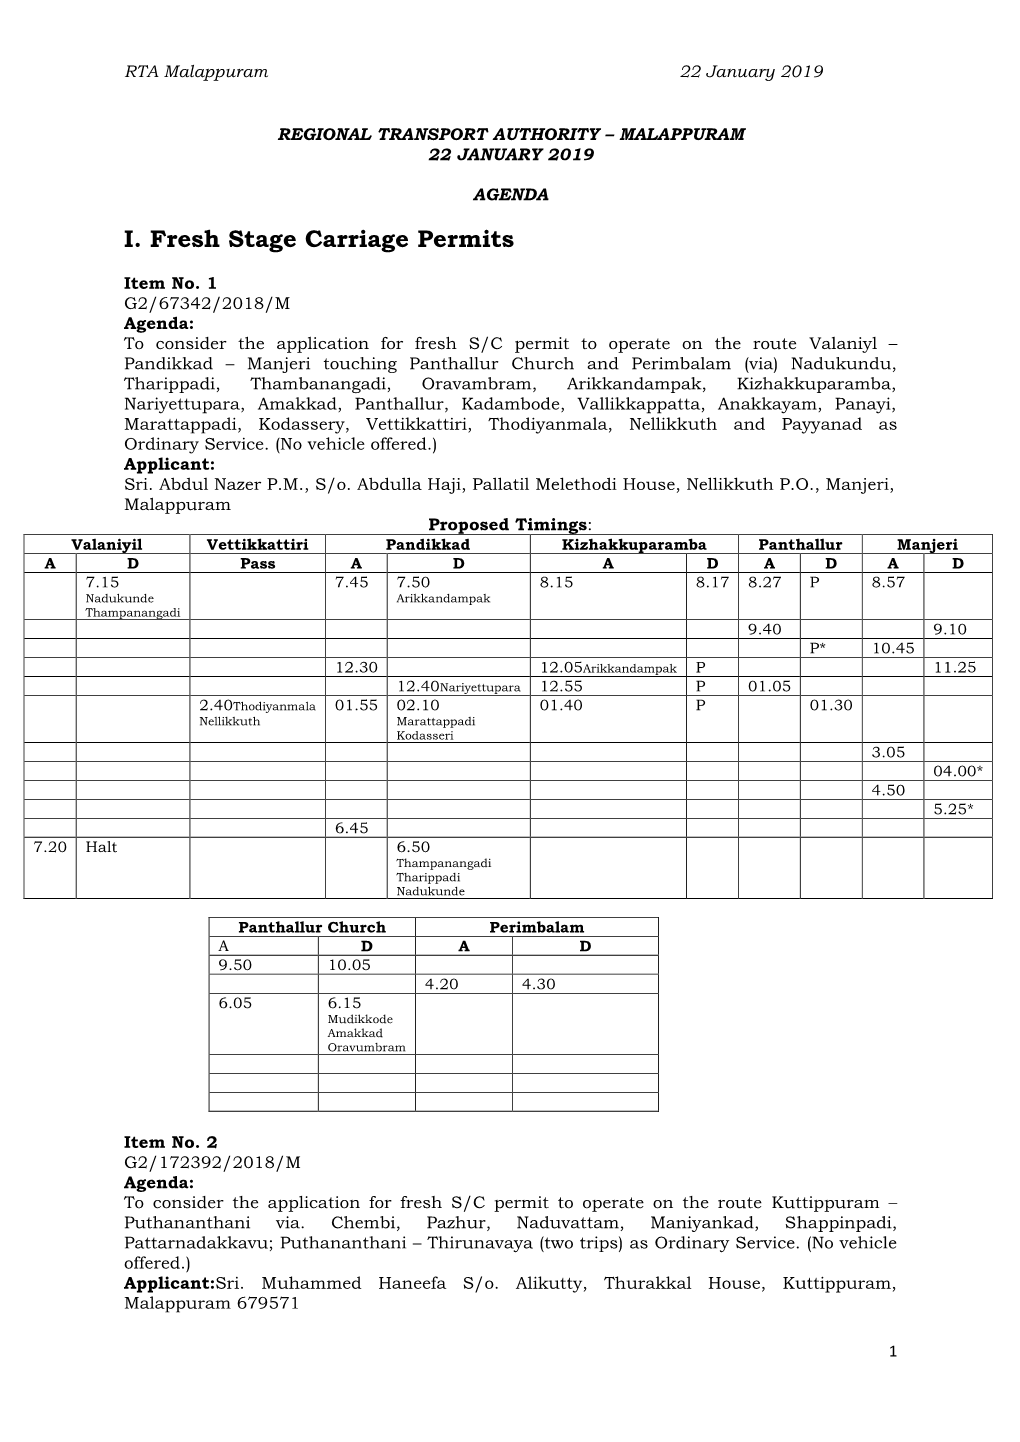 I. Fresh Stage Carriage Permits